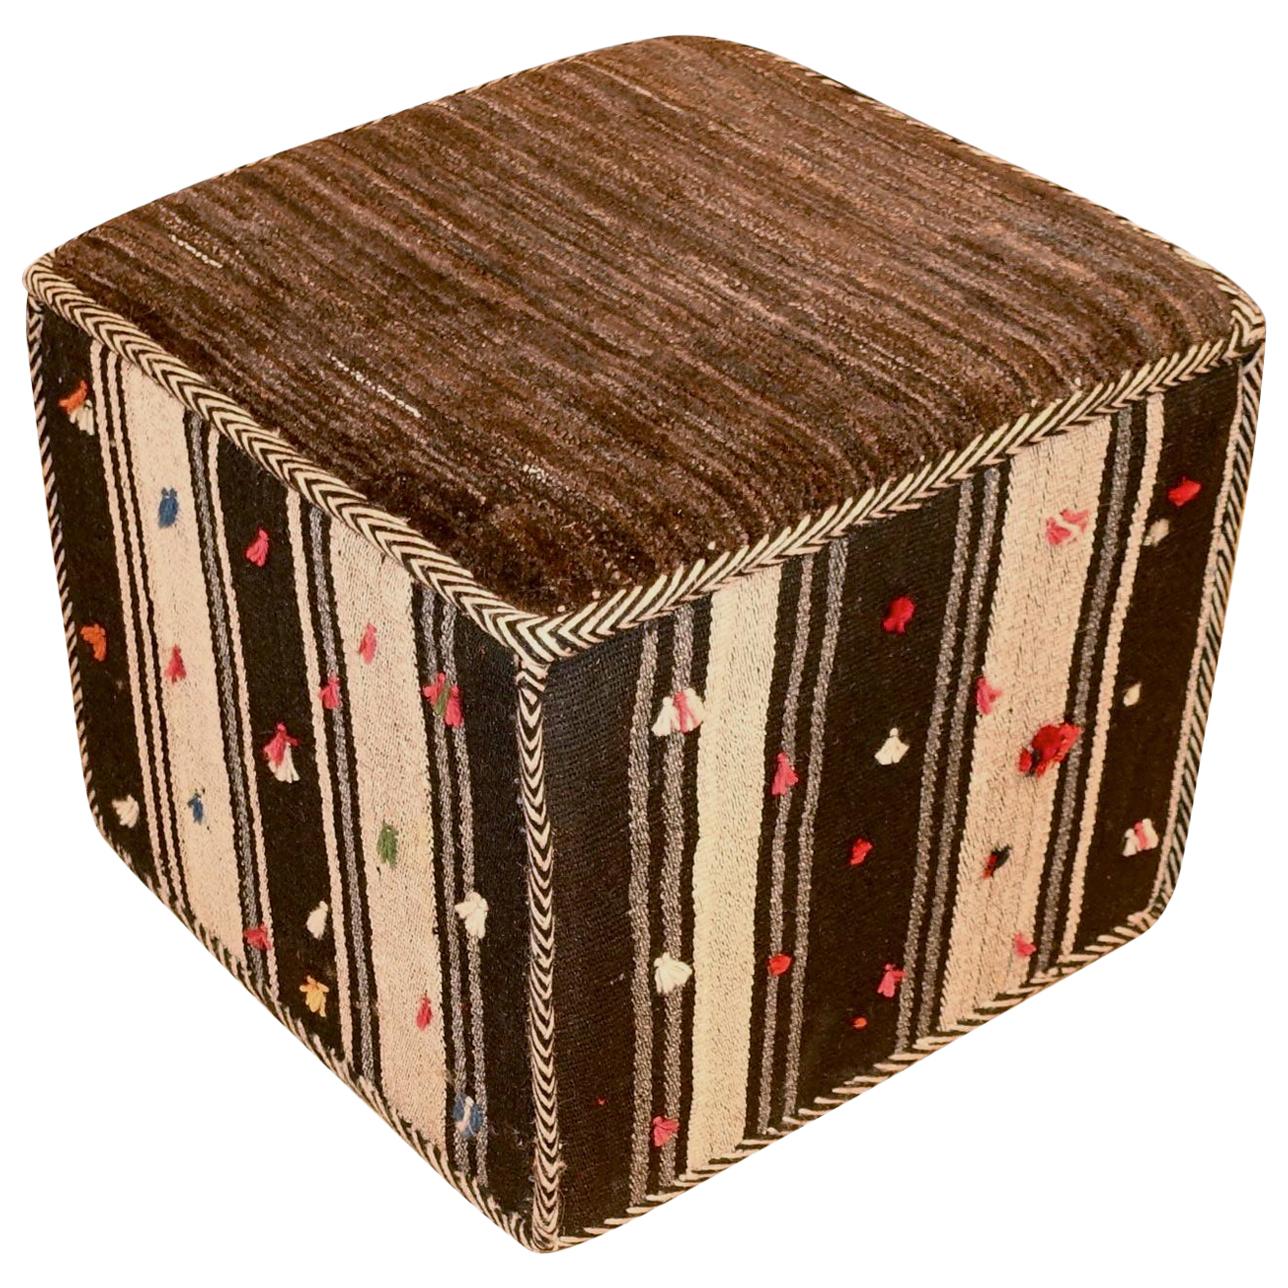 Contemporary Middle Eastern multi stripe with red and white nips Kilim footstool.
Awning stripe with chocolate brown and cream, multi-color nips
Part of a collection of four sold individually.
 